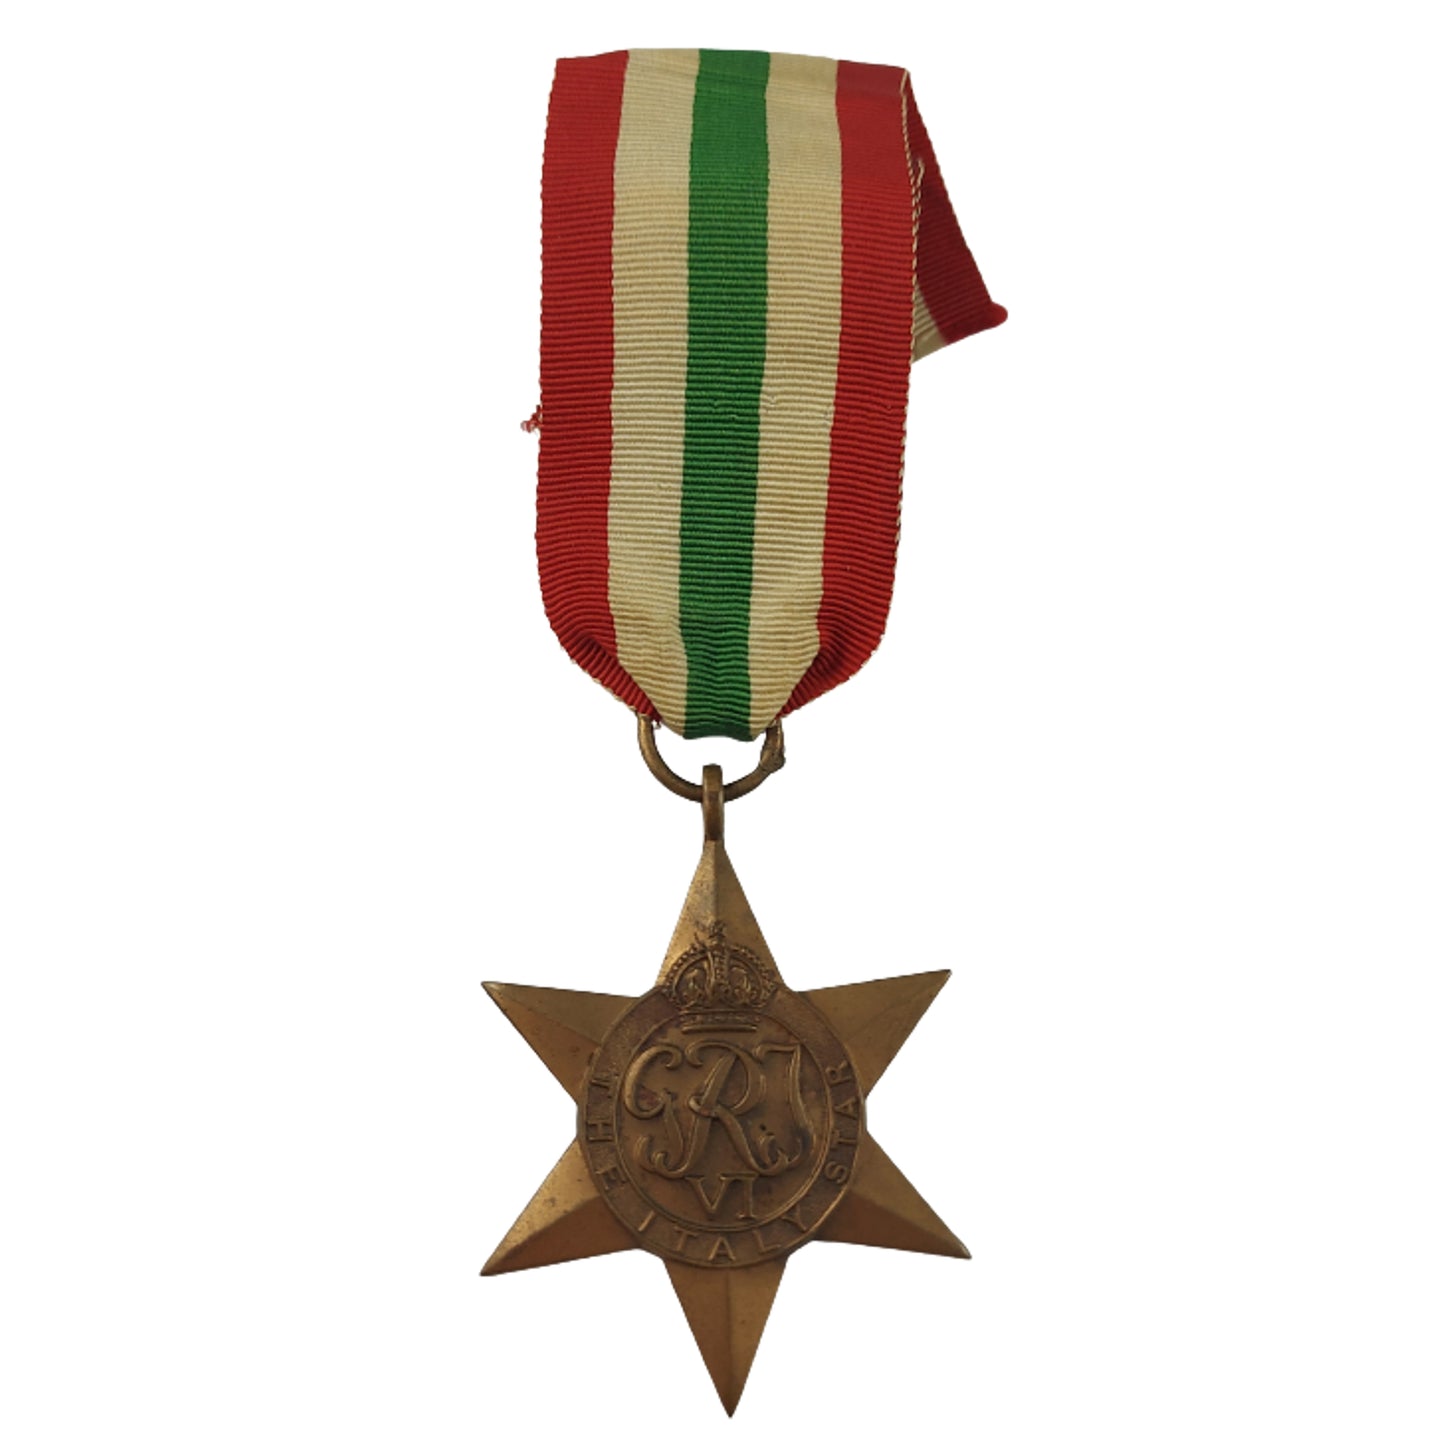 WW2 Canadian Medal - The Italy Star